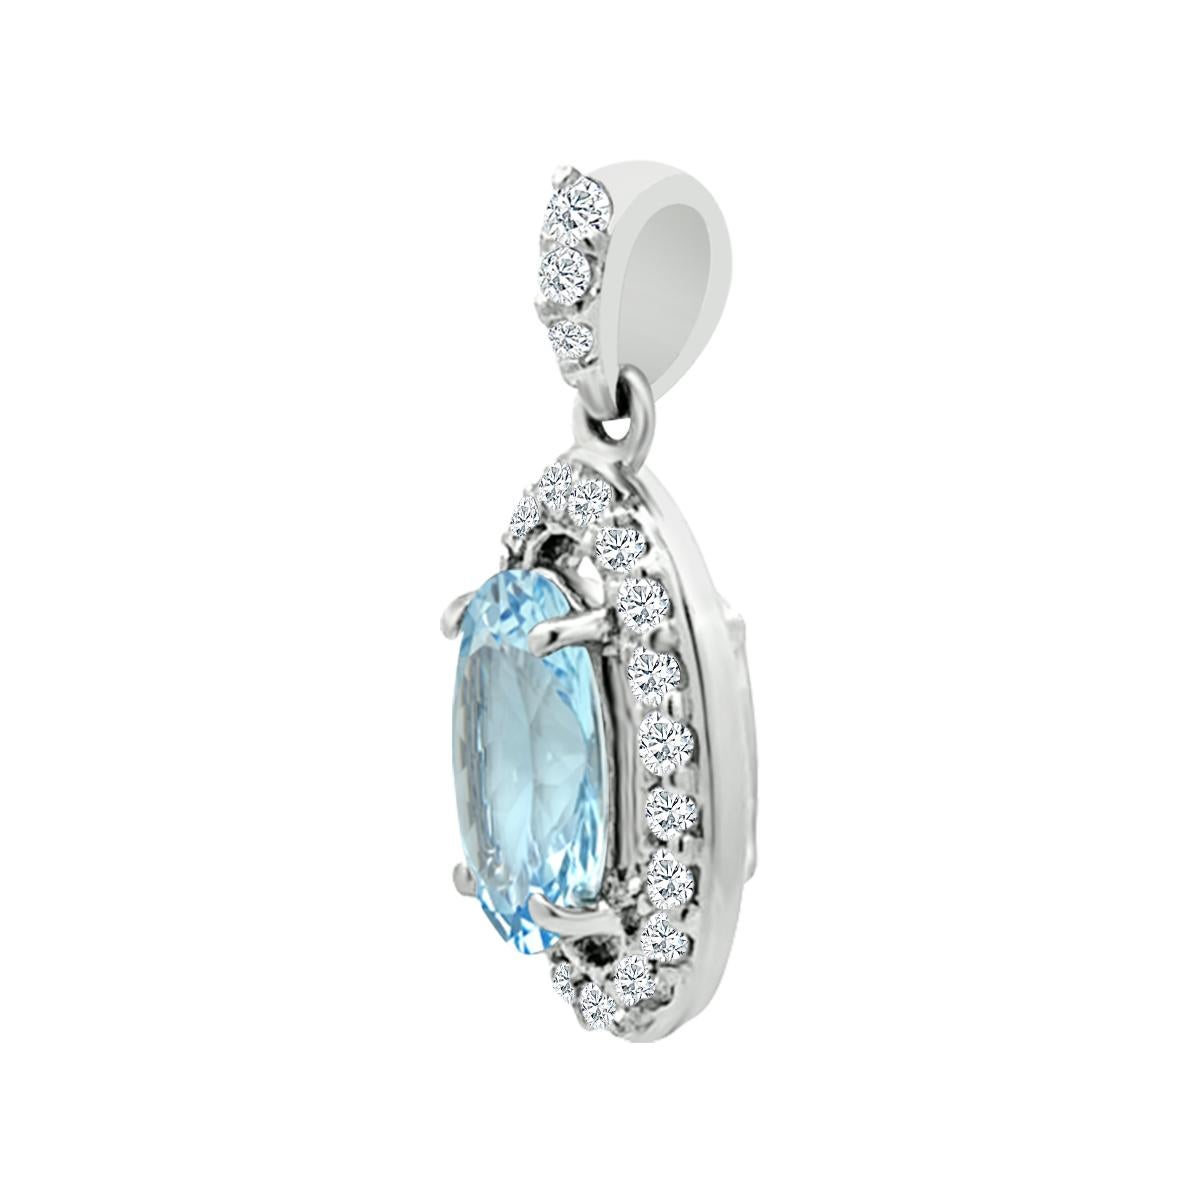 Modern 14K White Gold 0.70cts Aquamarine and Diamond Pendant, Style#TS1310AQP 22029/13 For Sale